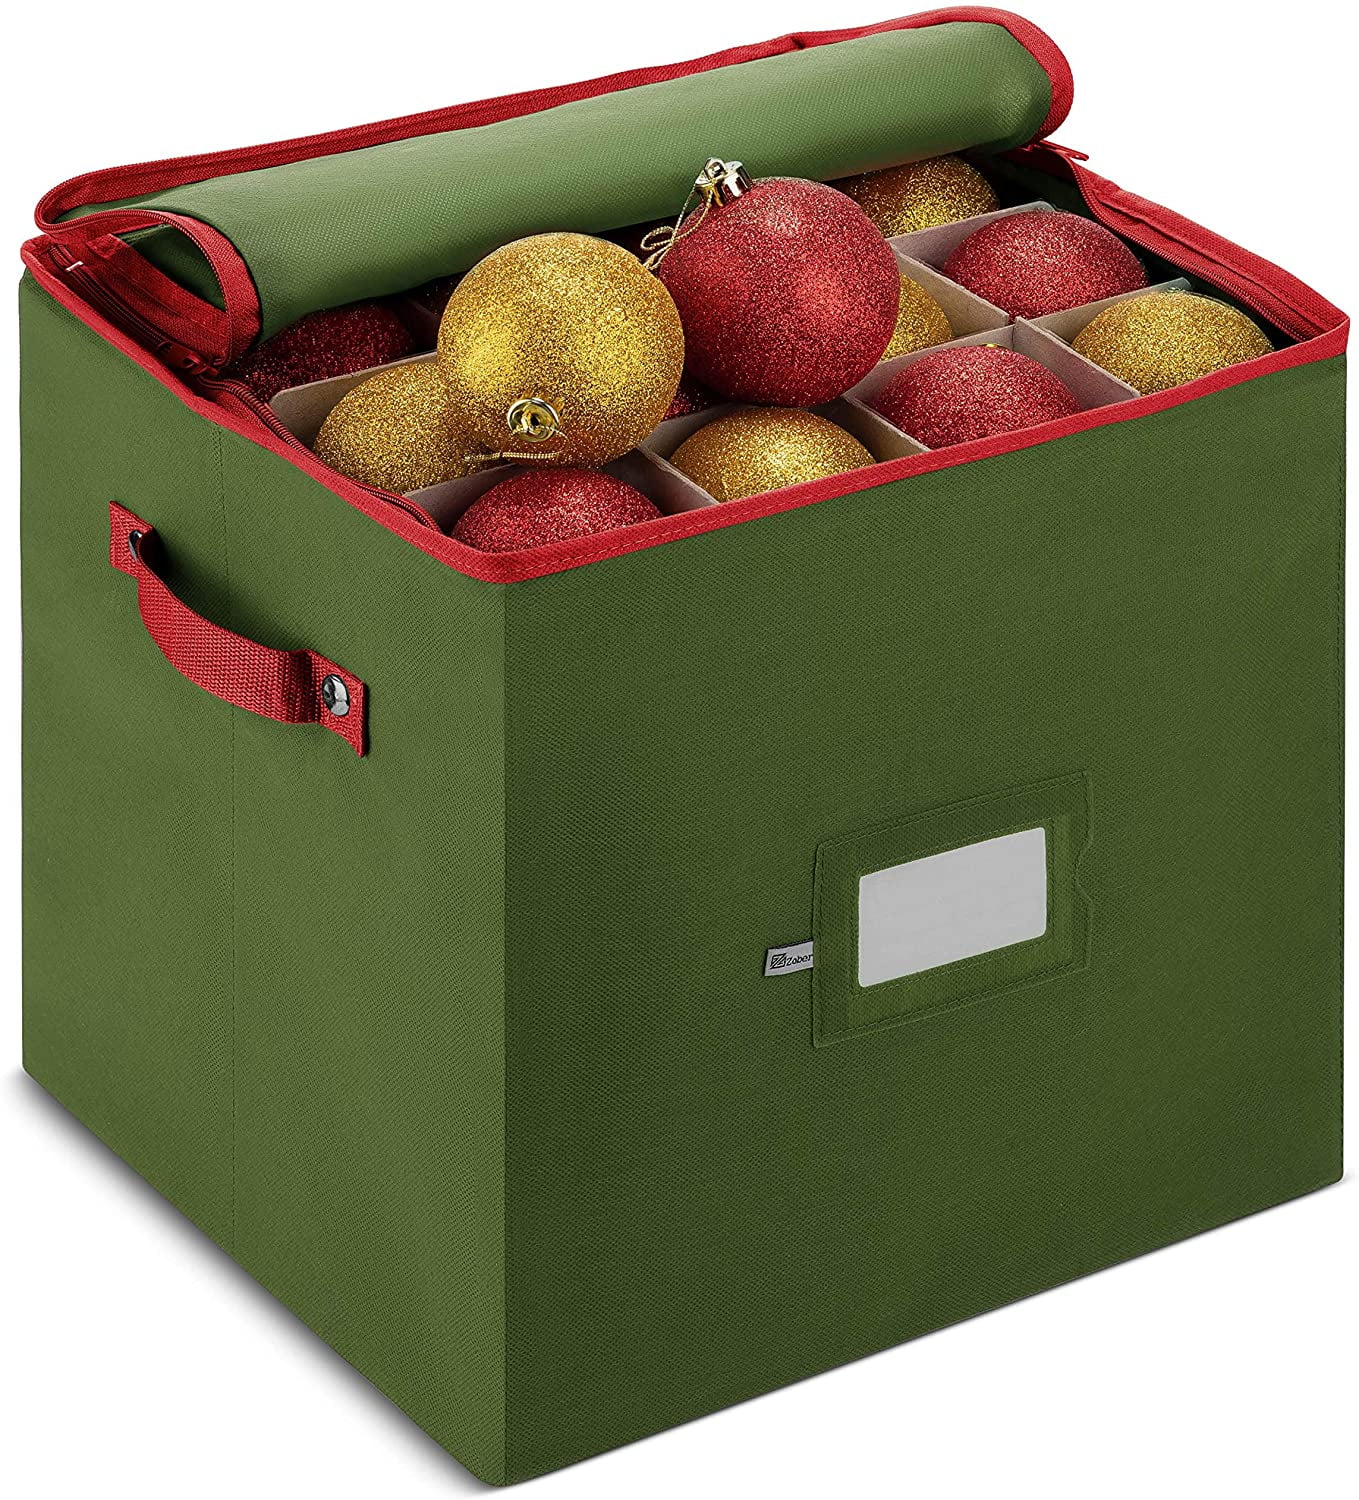 StorageBud Large Christmas Ornament Storage Box with Adjustable Dividers - Ornament  Storage Container For 128 Holiday Ornaments - On Sale - Bed Bath & Beyond -  36784851